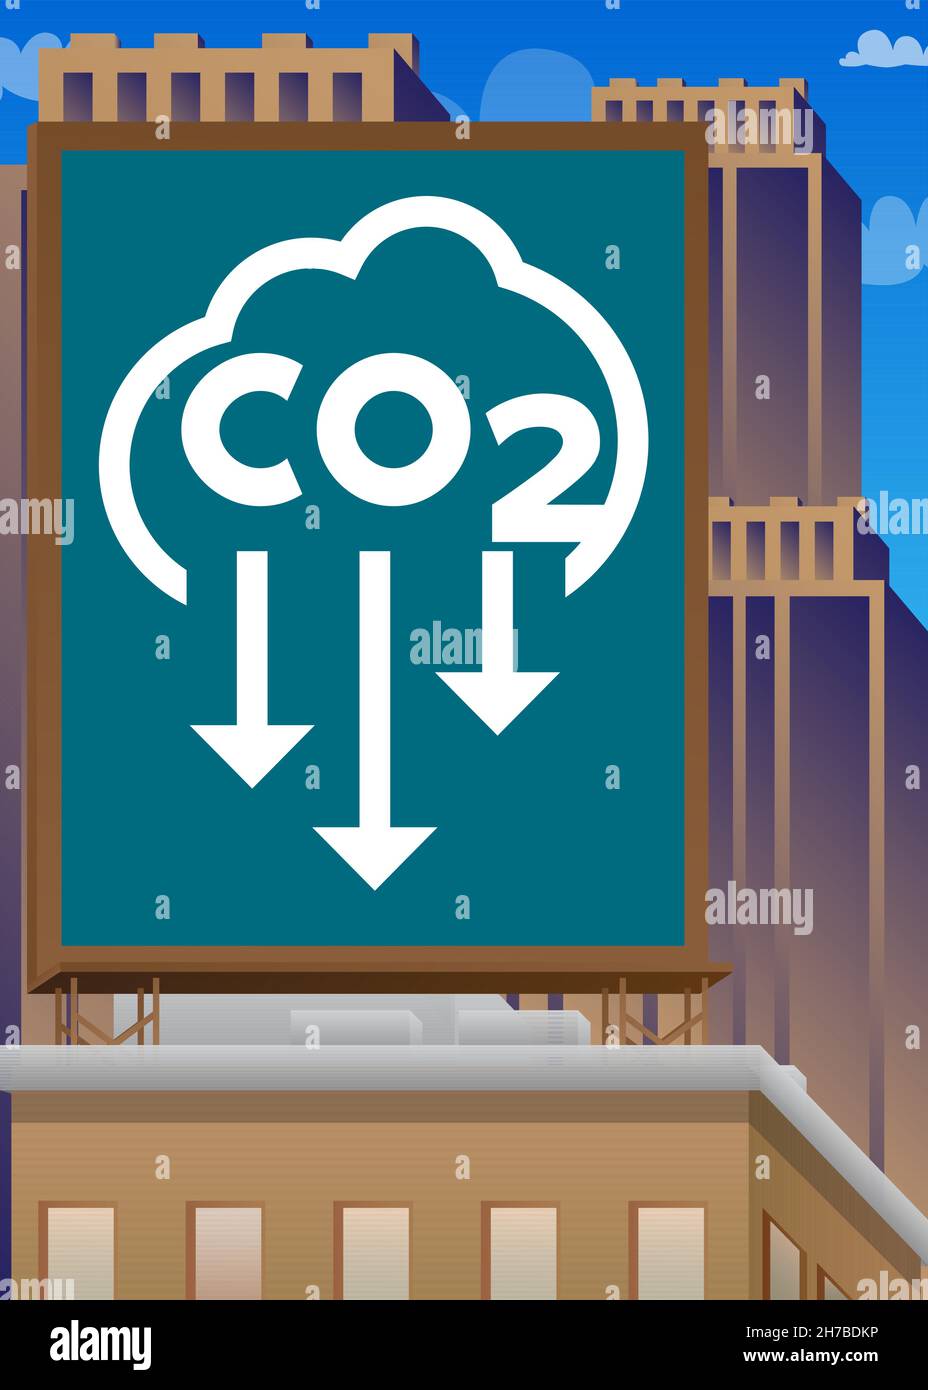 CO2 emission sign, Carbon dioxide icon on a billboard atop a building. Outdoor advertising in the city. Large banner on roof top of a brick architectu Stock Vector